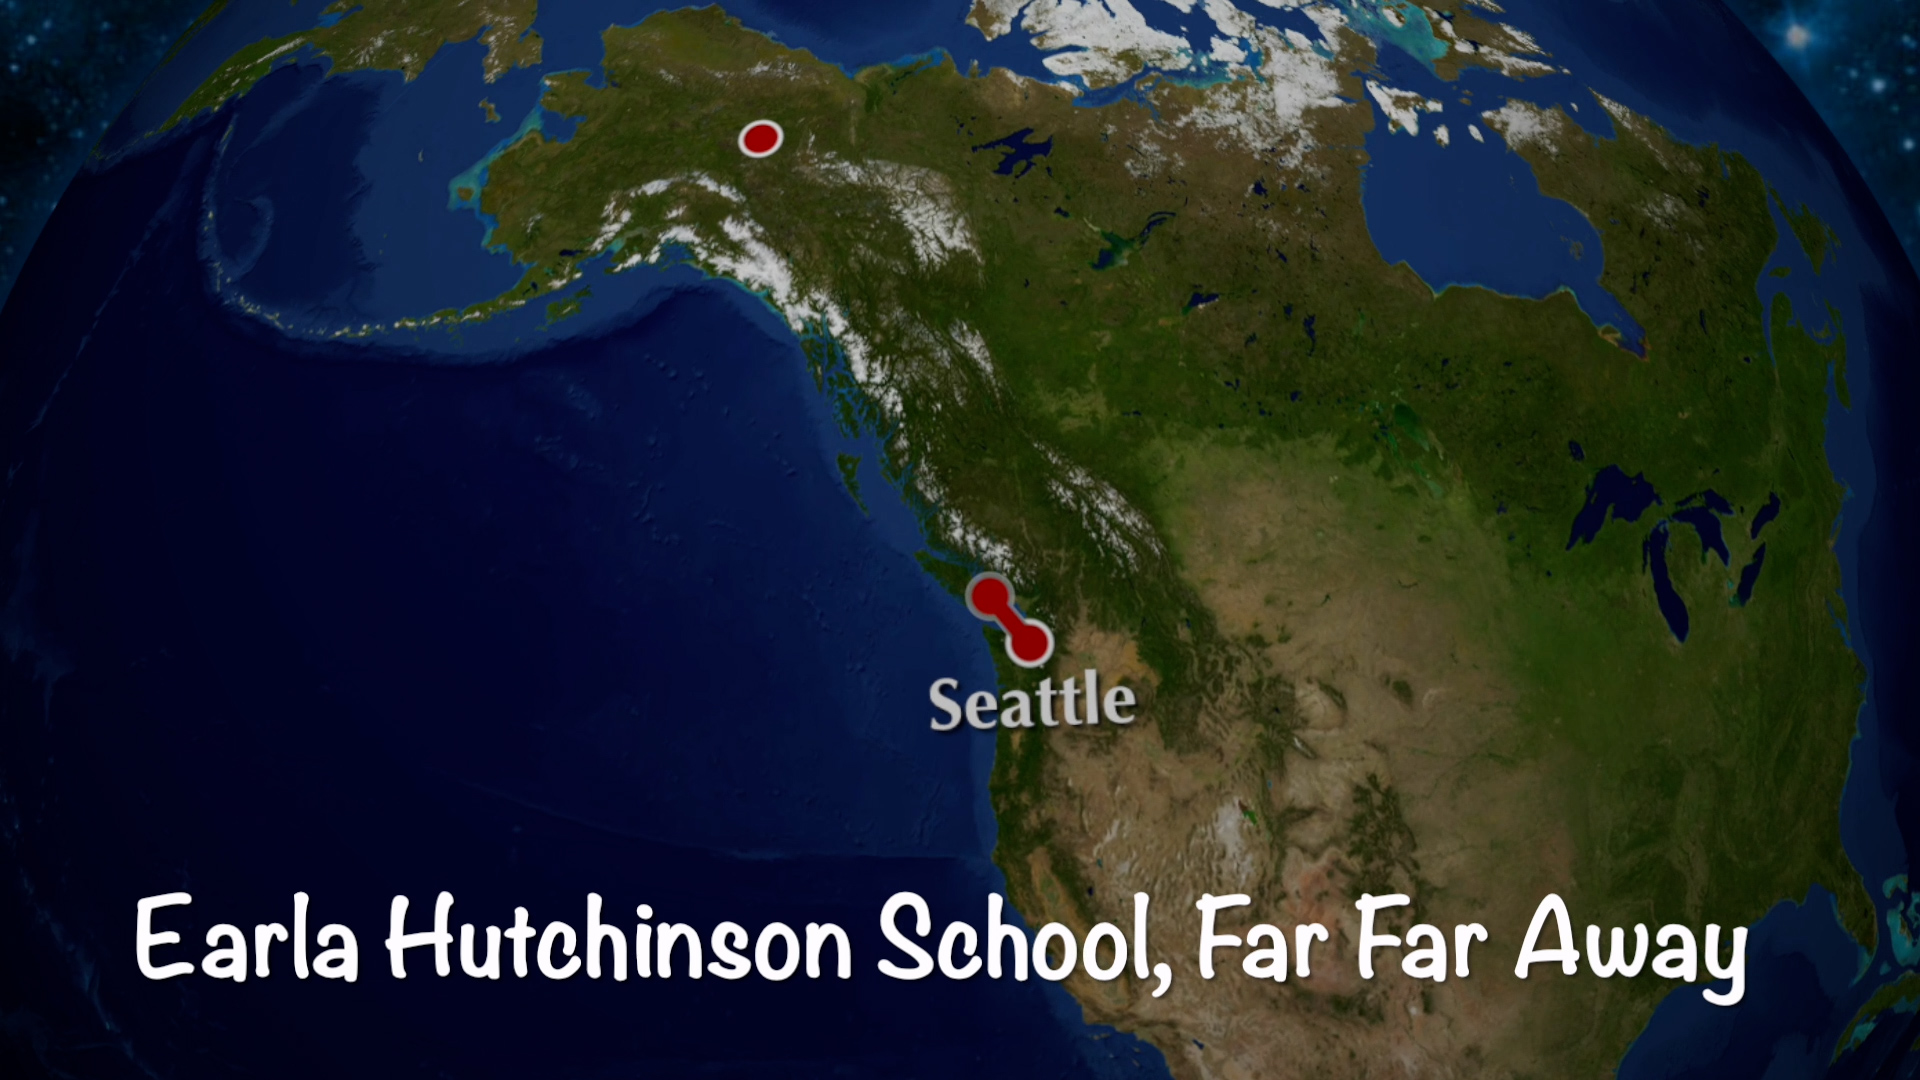 Map of west coast and direction of school